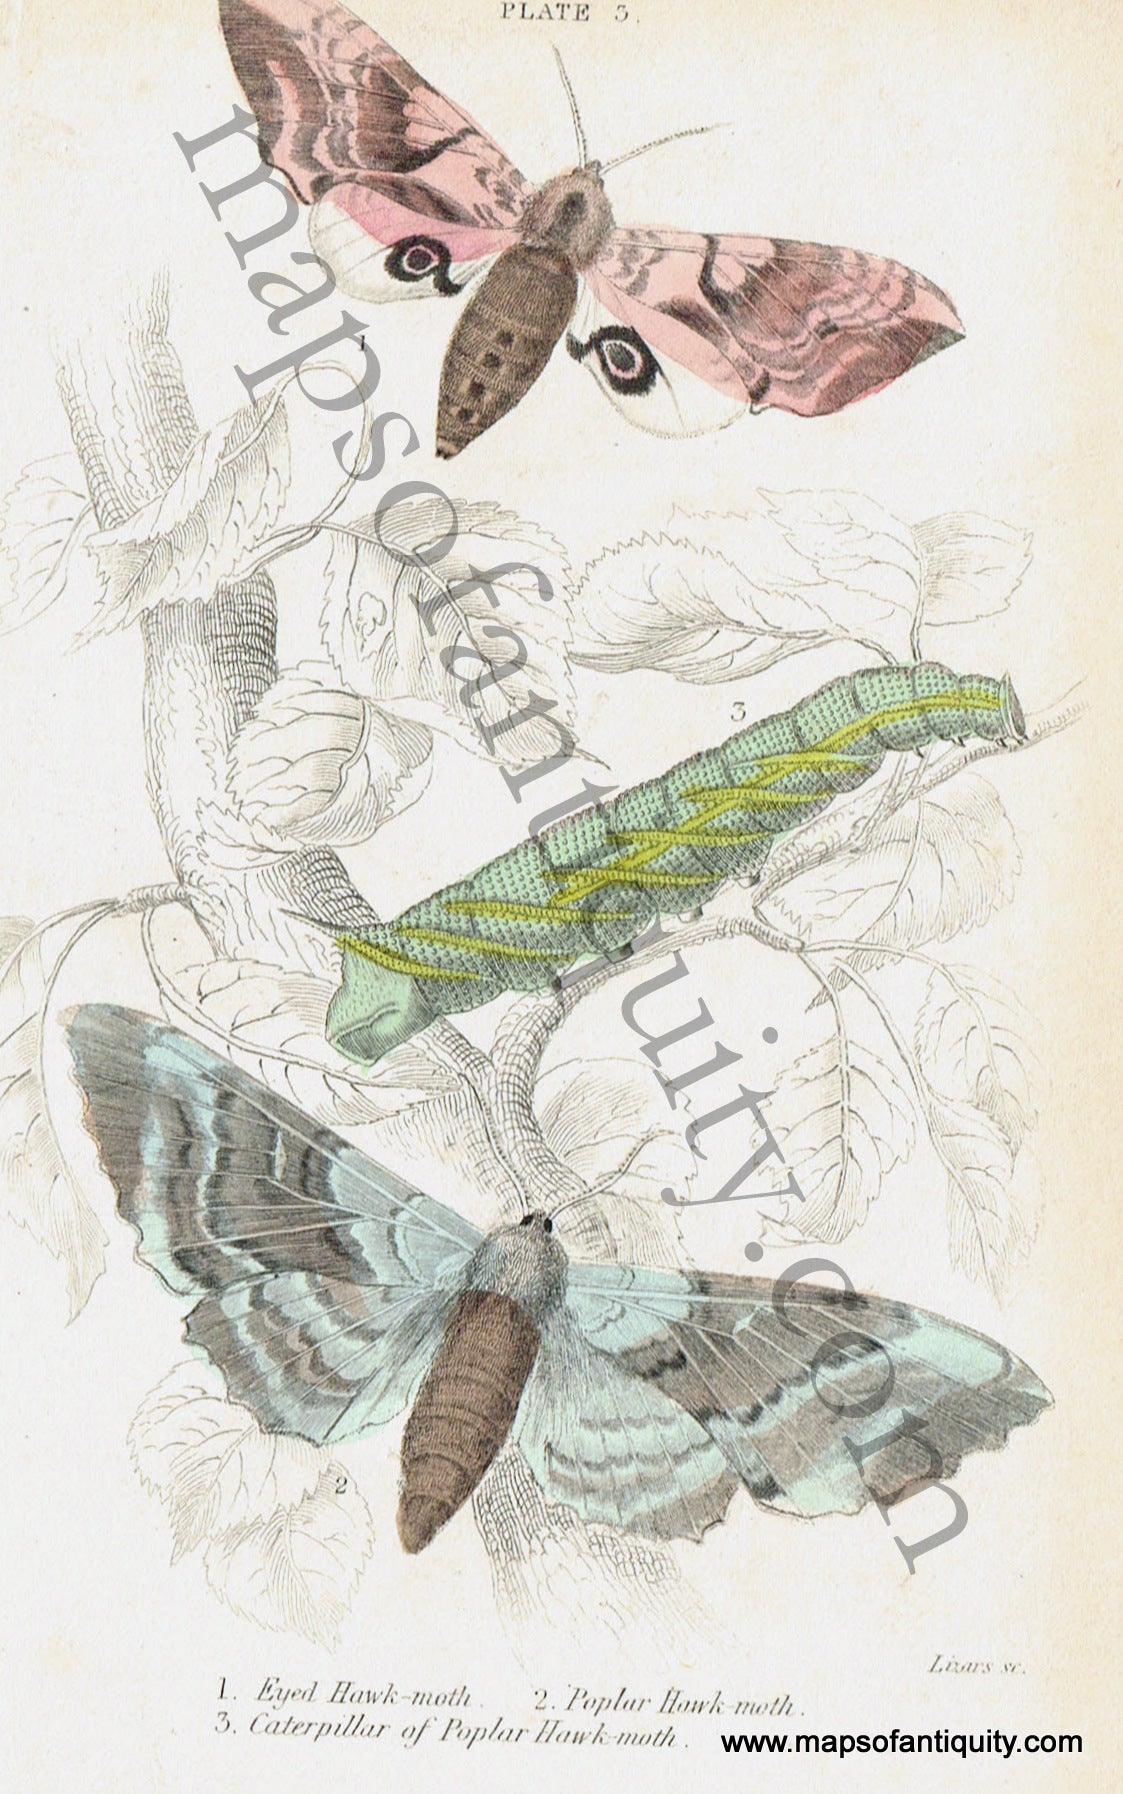 Antique-Hand-Colored-Print-Eyed-Hawk-moth-&-Poplar-Hawk-moth-Antique-Prints-Natural-History-Insects-1840-Duncan-Maps-Of-Antiquity